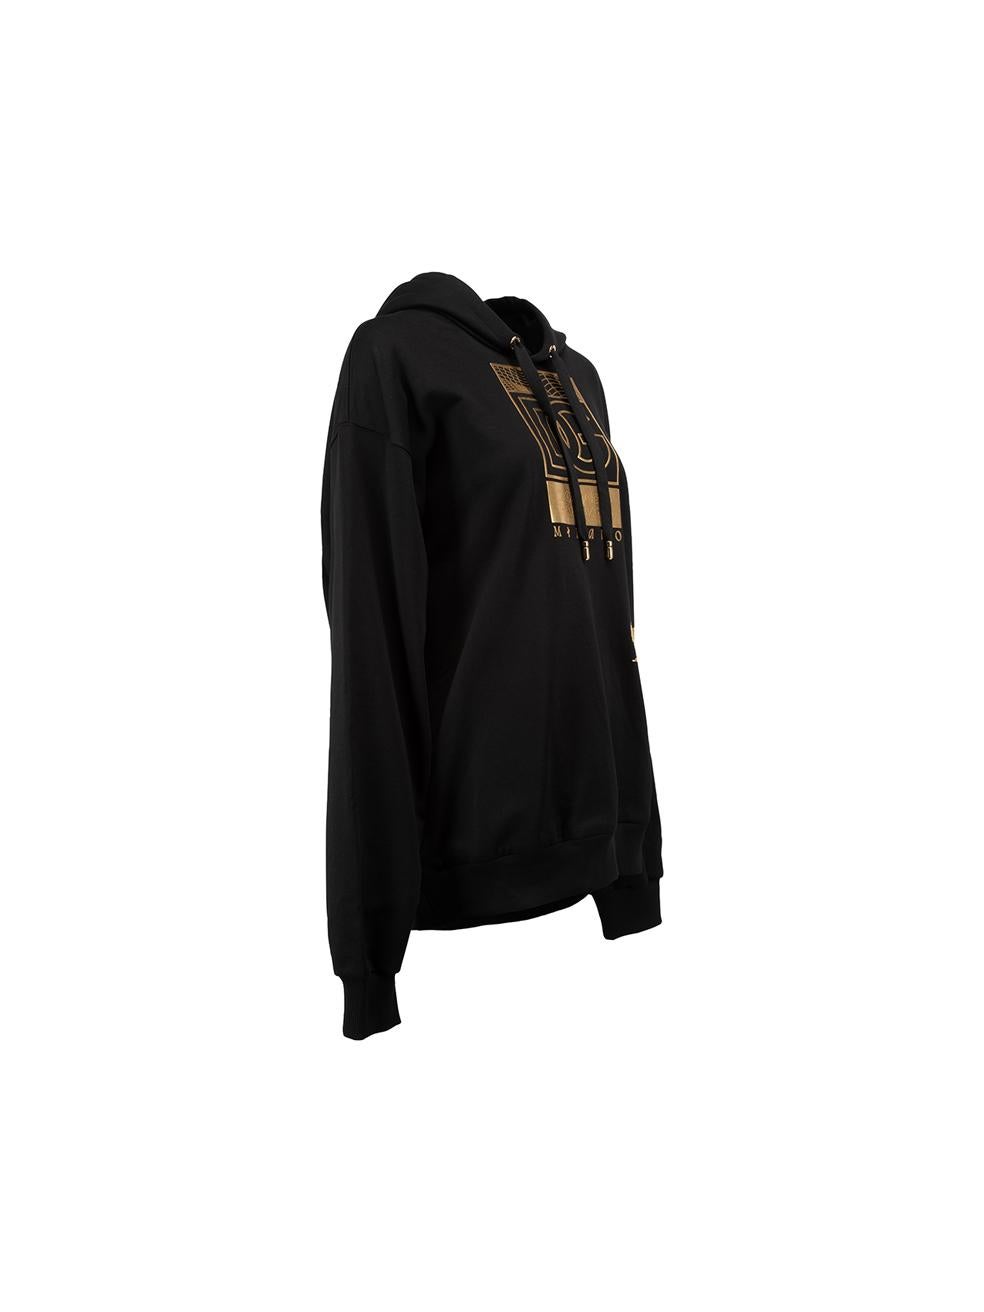 CONDITION is Never worn, with tags. No visible wear to hoodie is evident on this new Dolce & Gabbana designer resale item.



Details


Unisex

Black

Cotton

Long sleeves hoodie

Oversized fit

Gold tone Realtà Parallela print

Hooded with